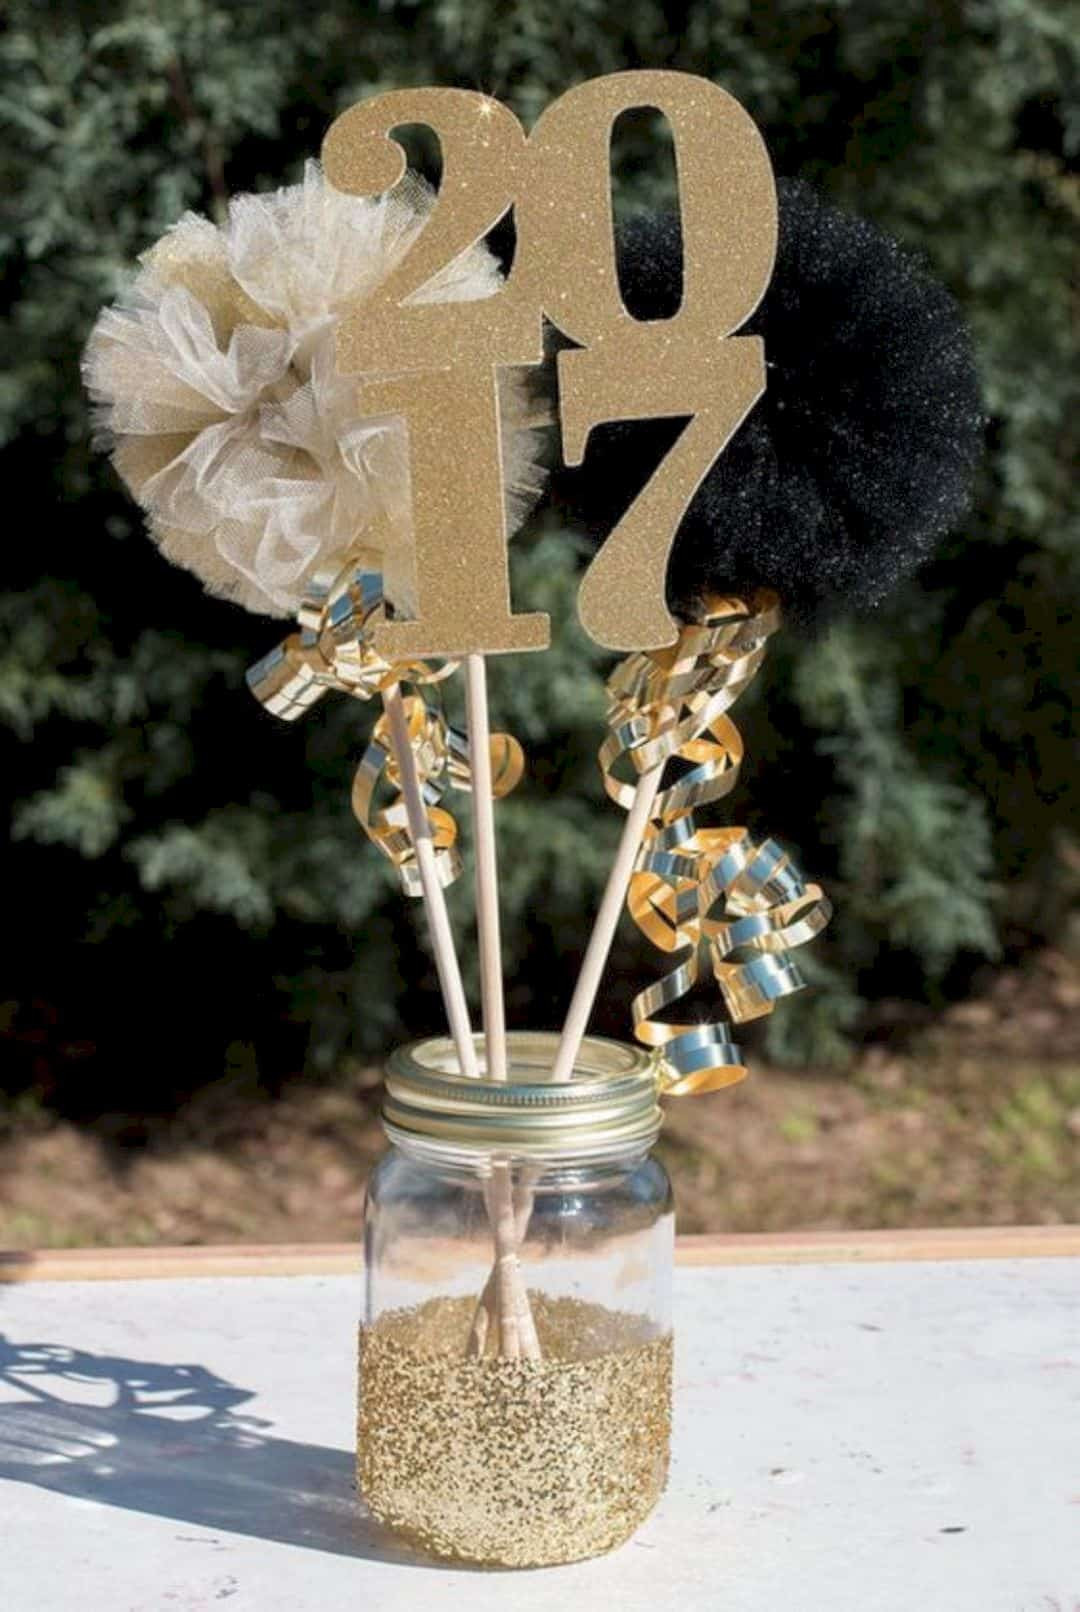 Ideas For Decorating For A Graduation Party
 15 Unique Ideas for Graduation Party Decoration